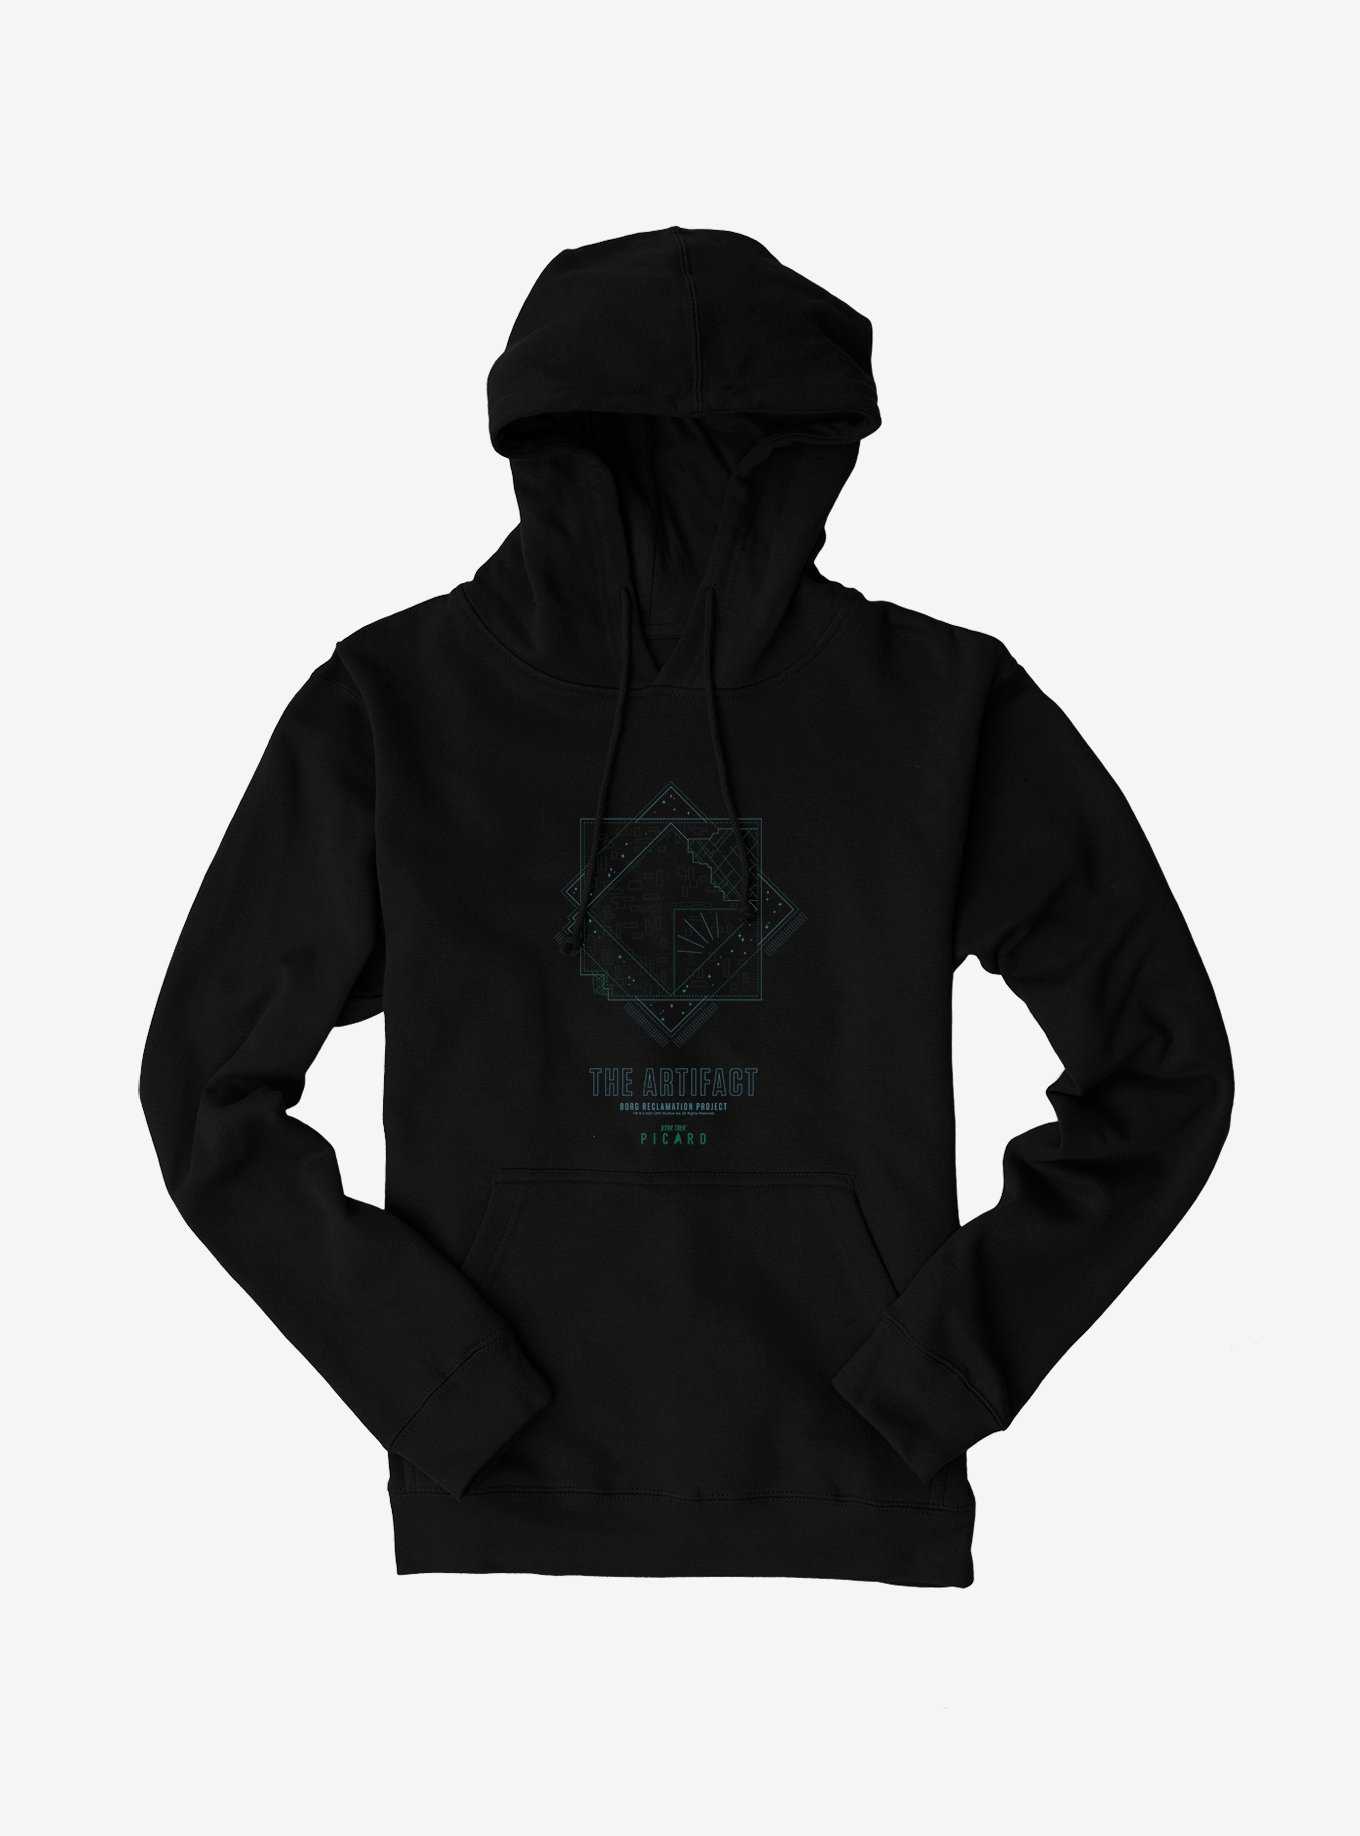 Star Trek: Picard The Artifact Borg Reclamation Project Hoodie, , hi-res